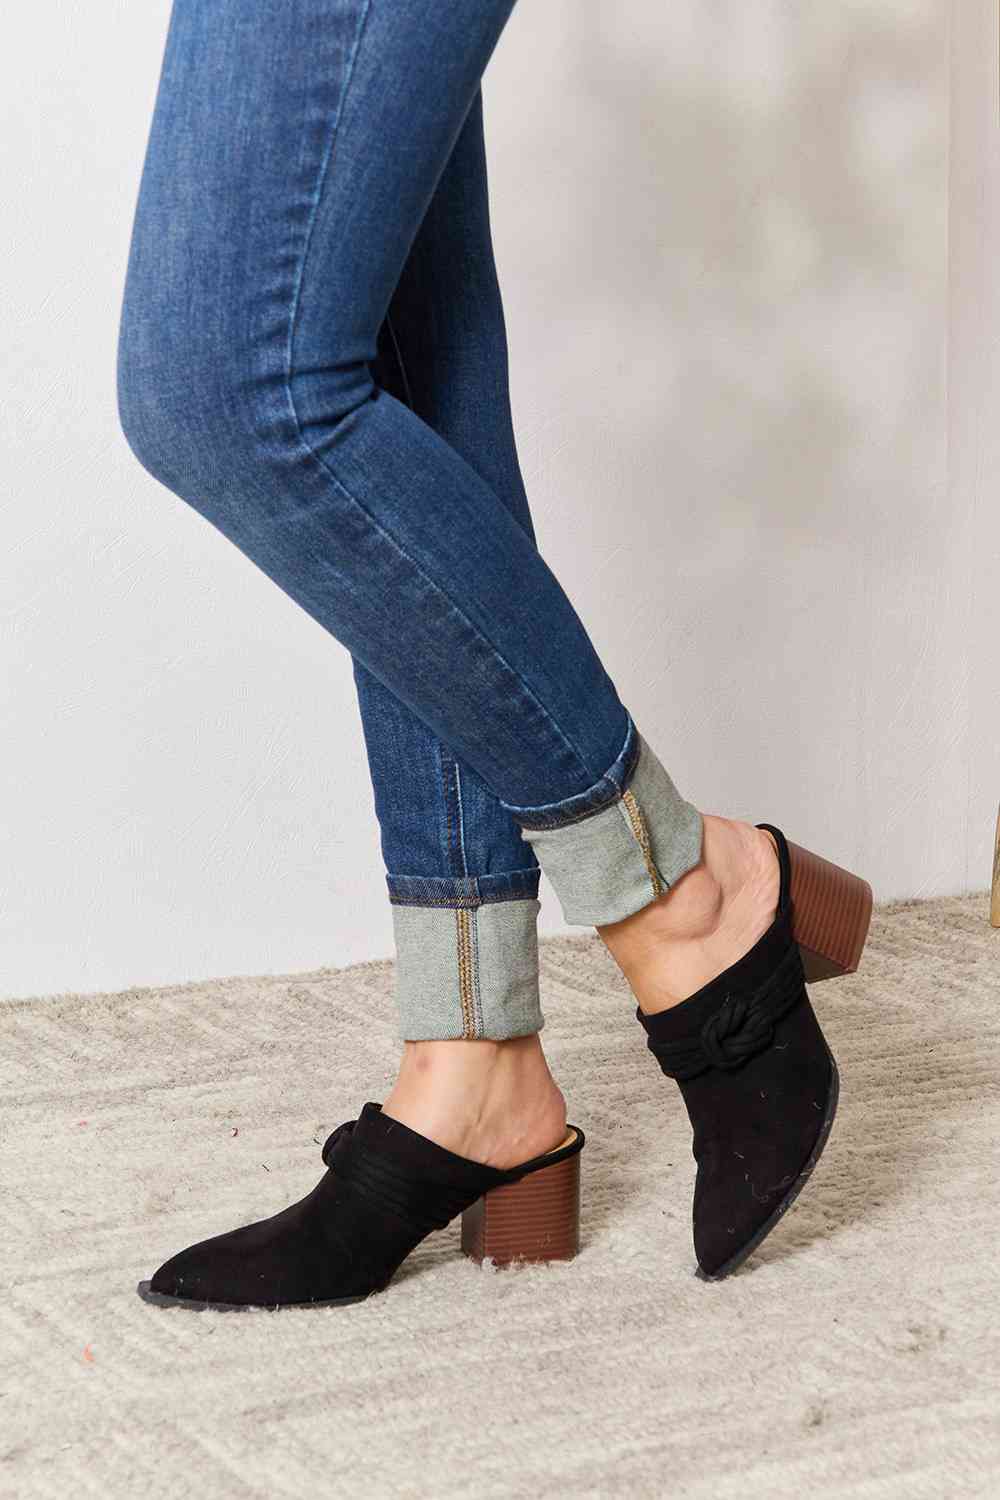 East Lion Corp Pointed-Toe Braided Trim Mules